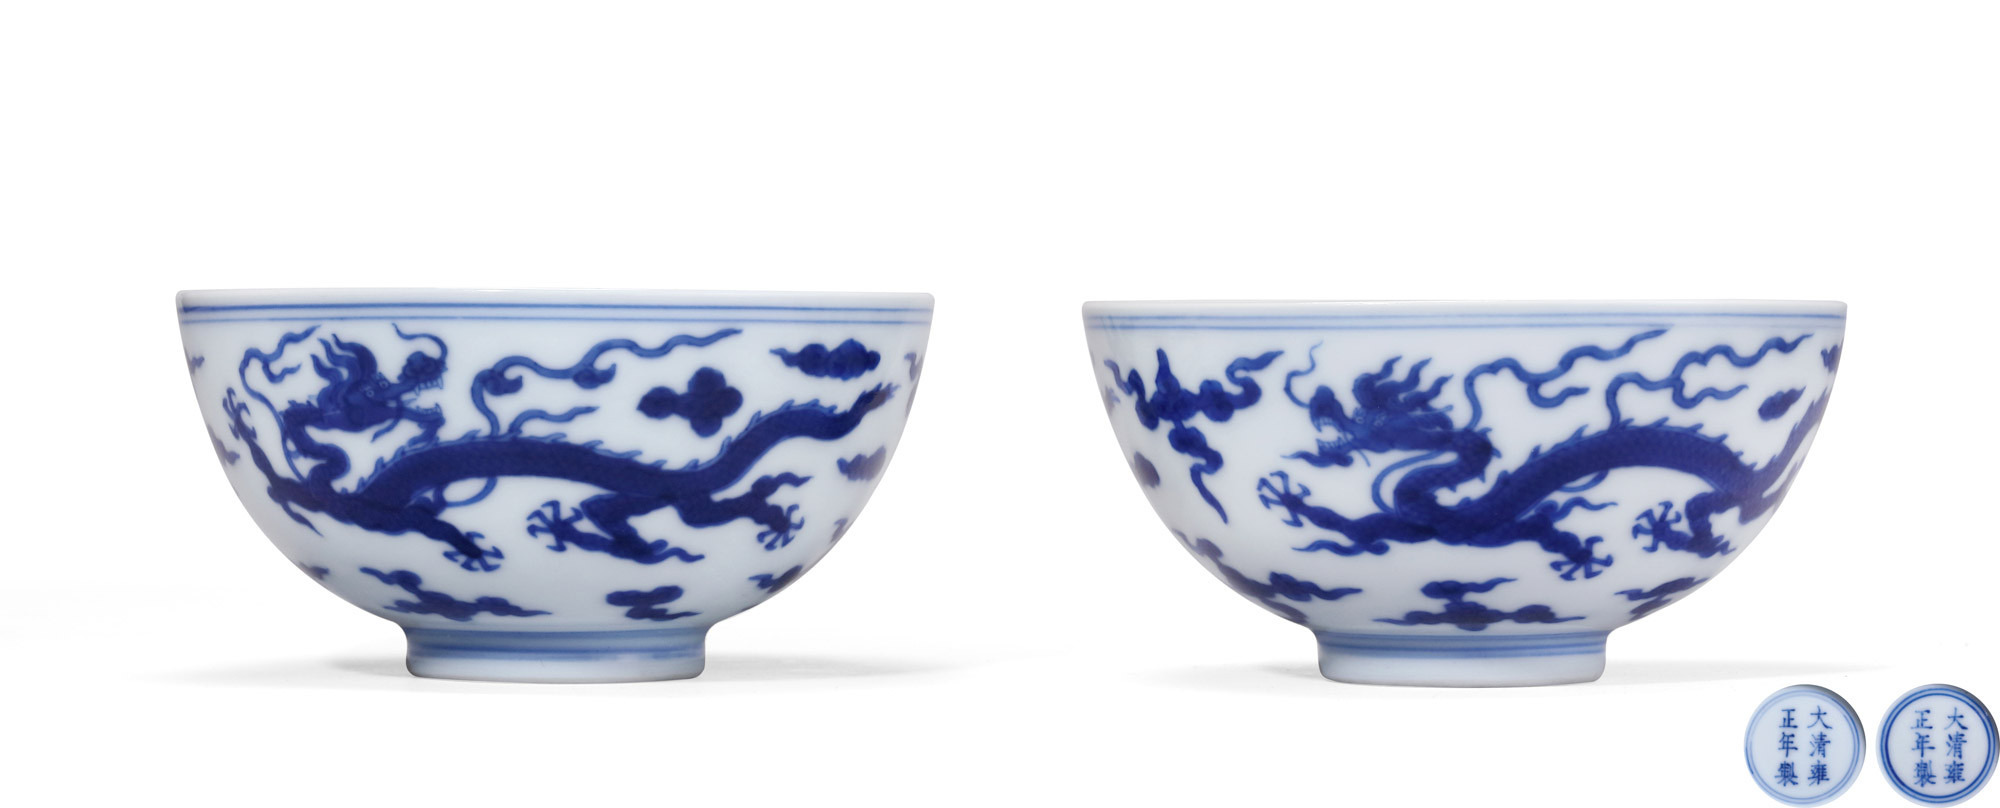 A RARE PAIR OF BLUE AND WHITE‘DRAGON’BOWLS